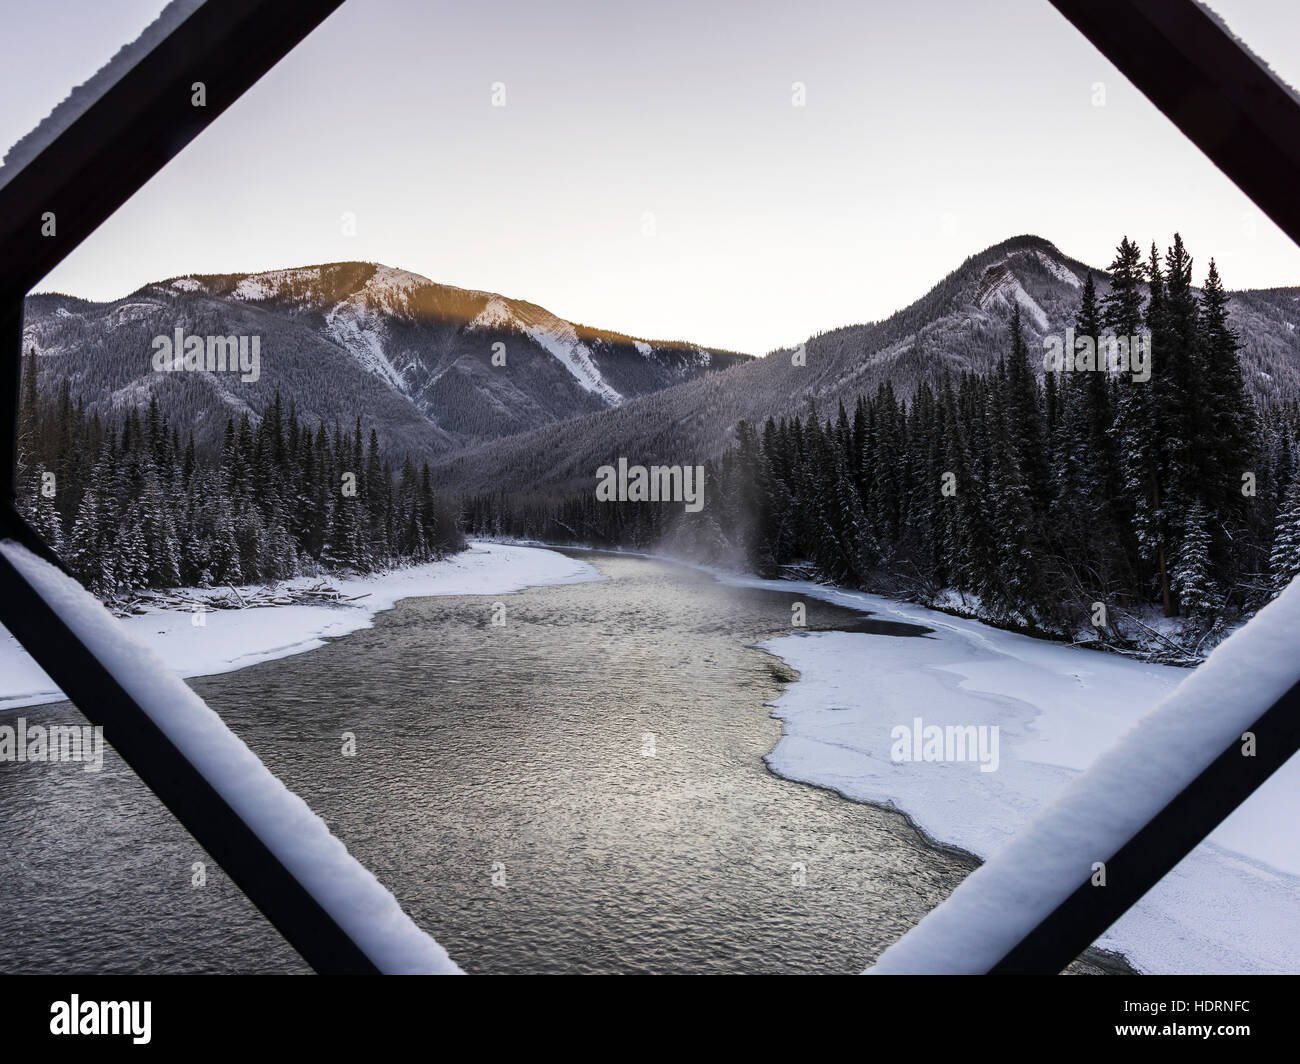 A landscape with snow along the shoreline of a lake and a mountain range viewed through a diamond shaped window frame; British Columbia, Canada Stock Photo